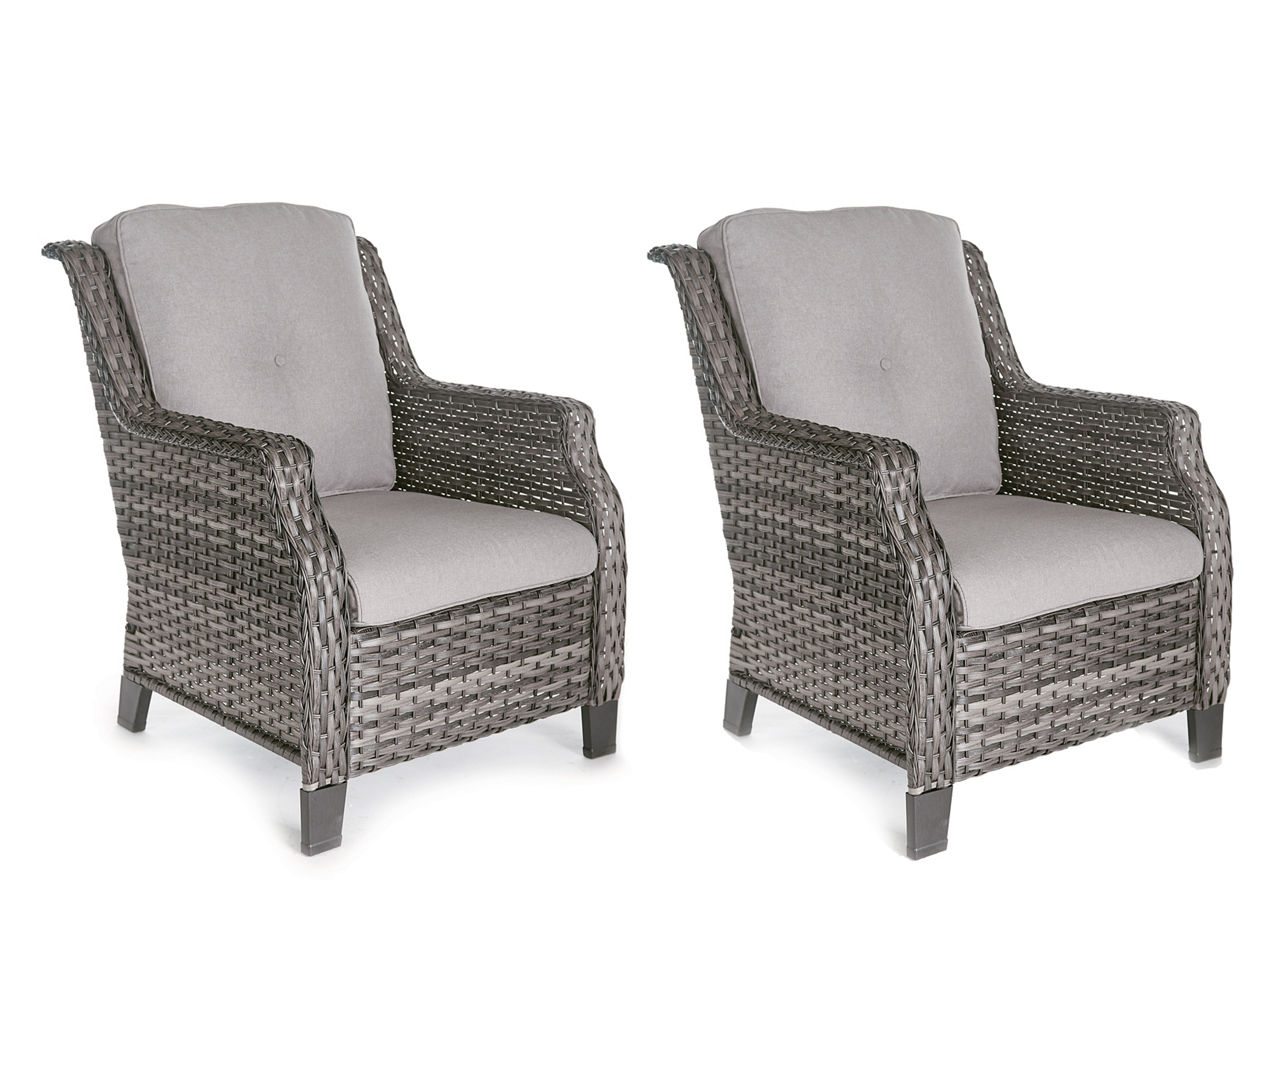 Rockbridge Gray All-Weather Wicker Cushioned Patio Chairs, 2-Pack